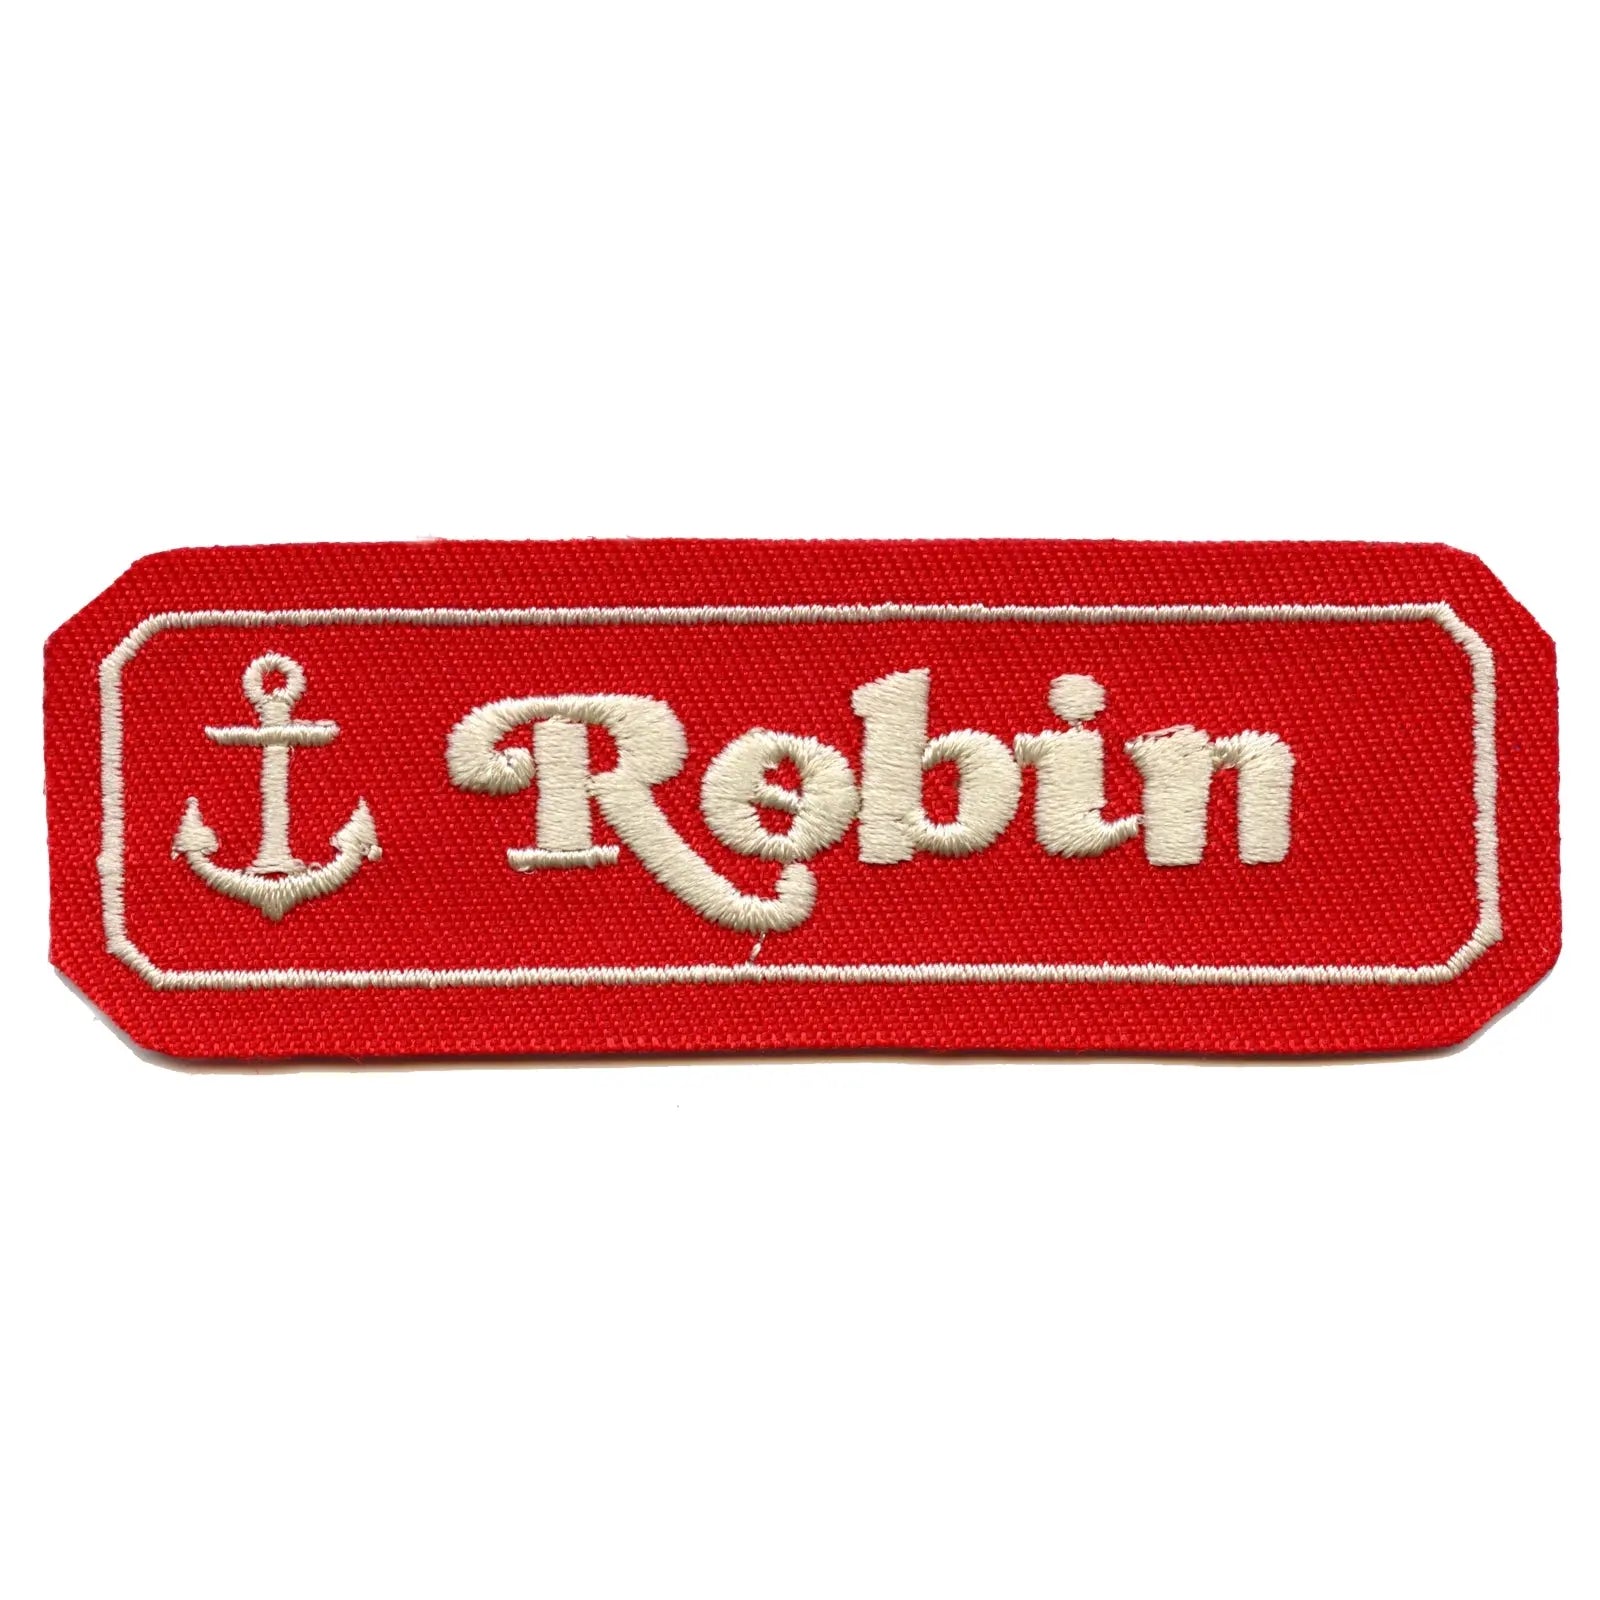 Scoops Ahoy Ice Cream Parlor "Robin" Name Tag Logo Iron On Costume Patch 